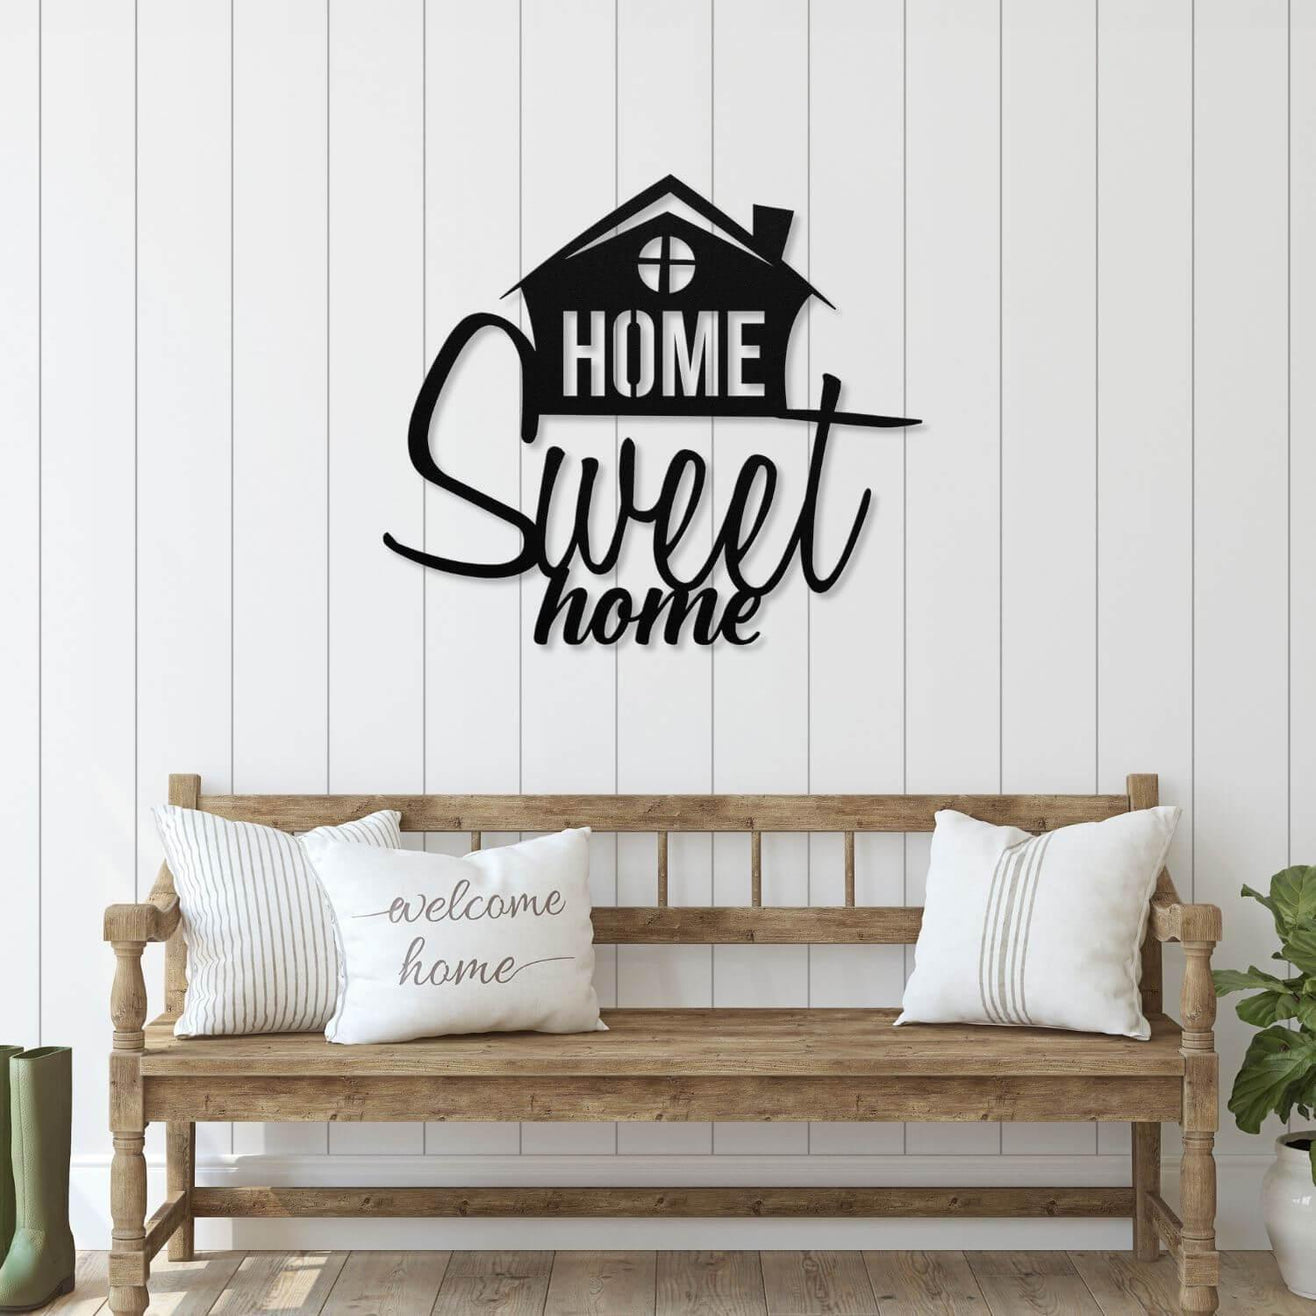 Home Sweet Home Sign - ProSteel Decor 